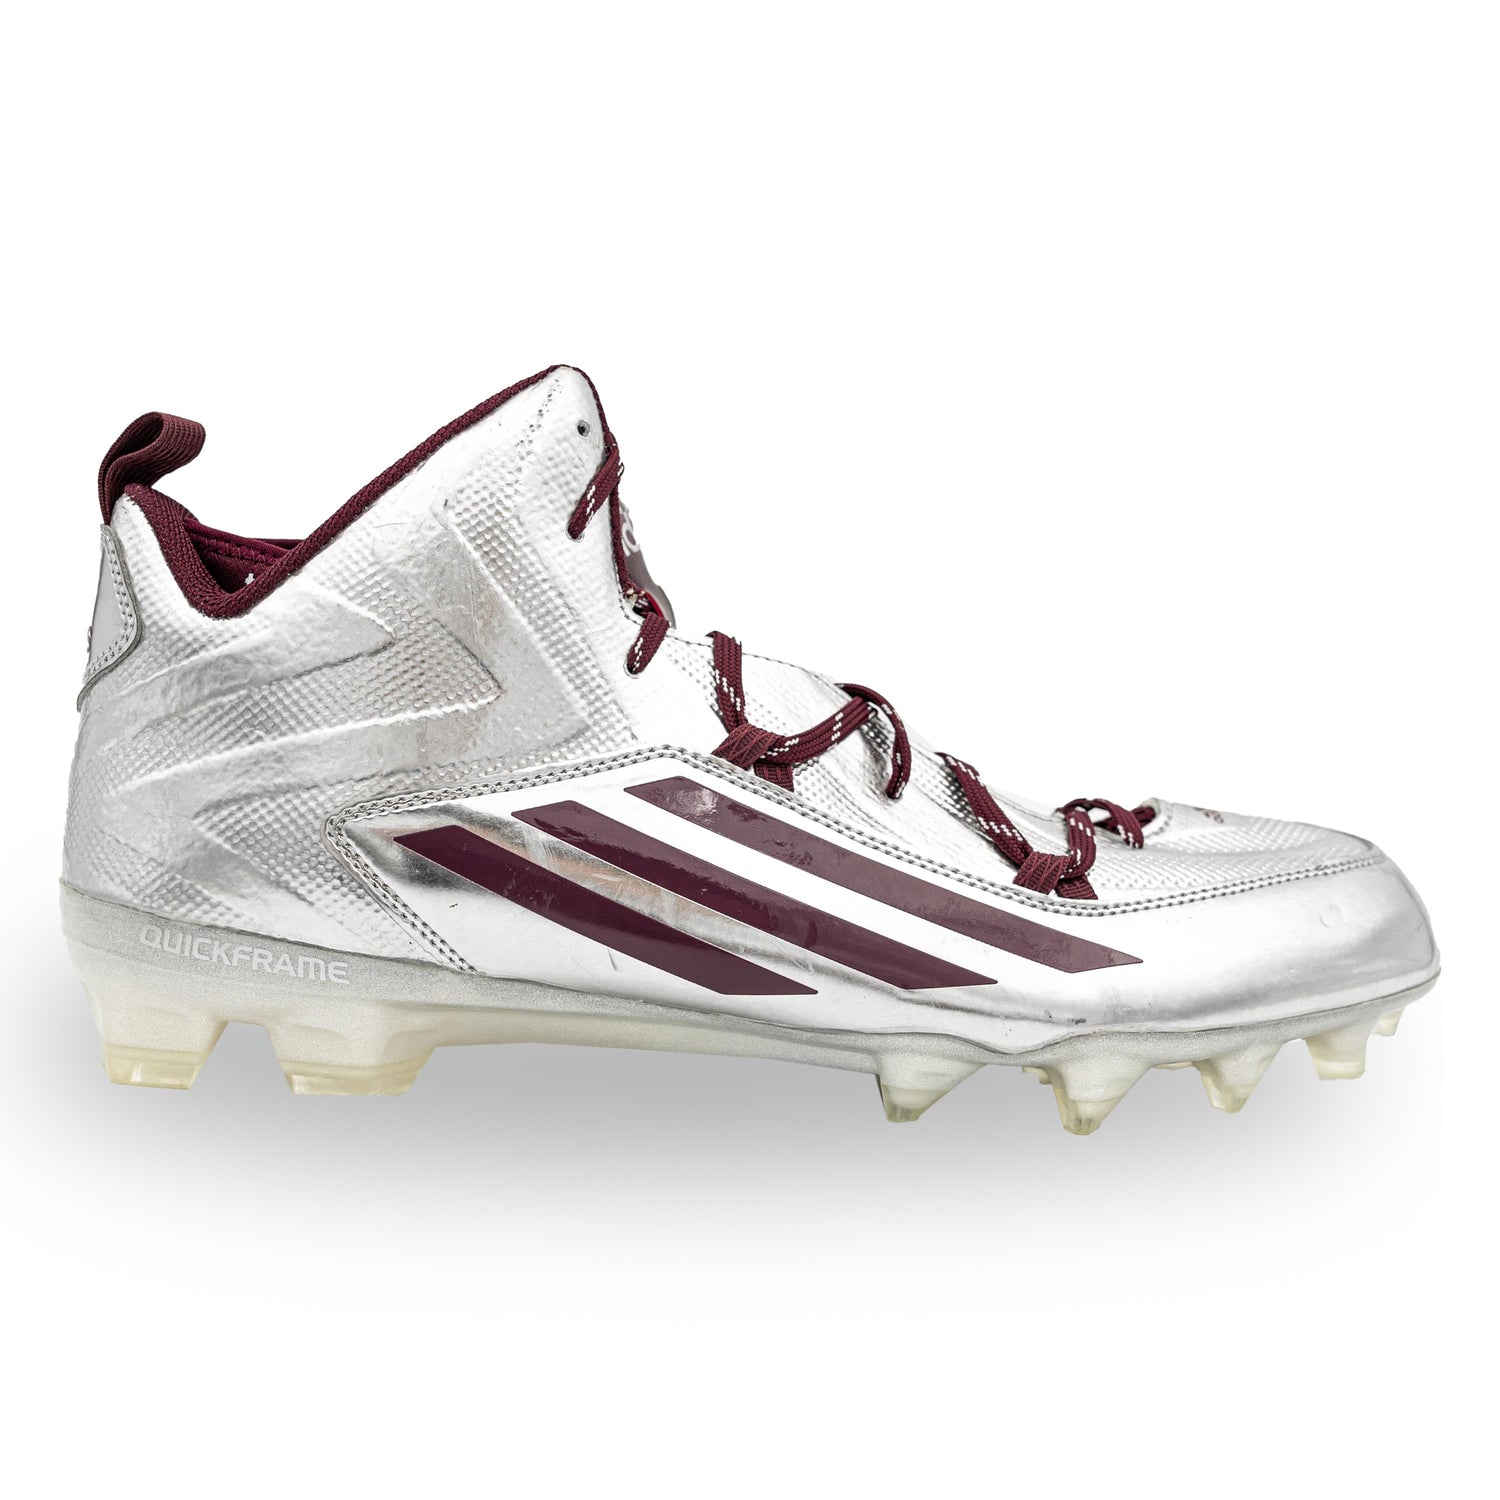 Texas A&M Collectible Adidas Lonestar Chrome & Maroon Cleats